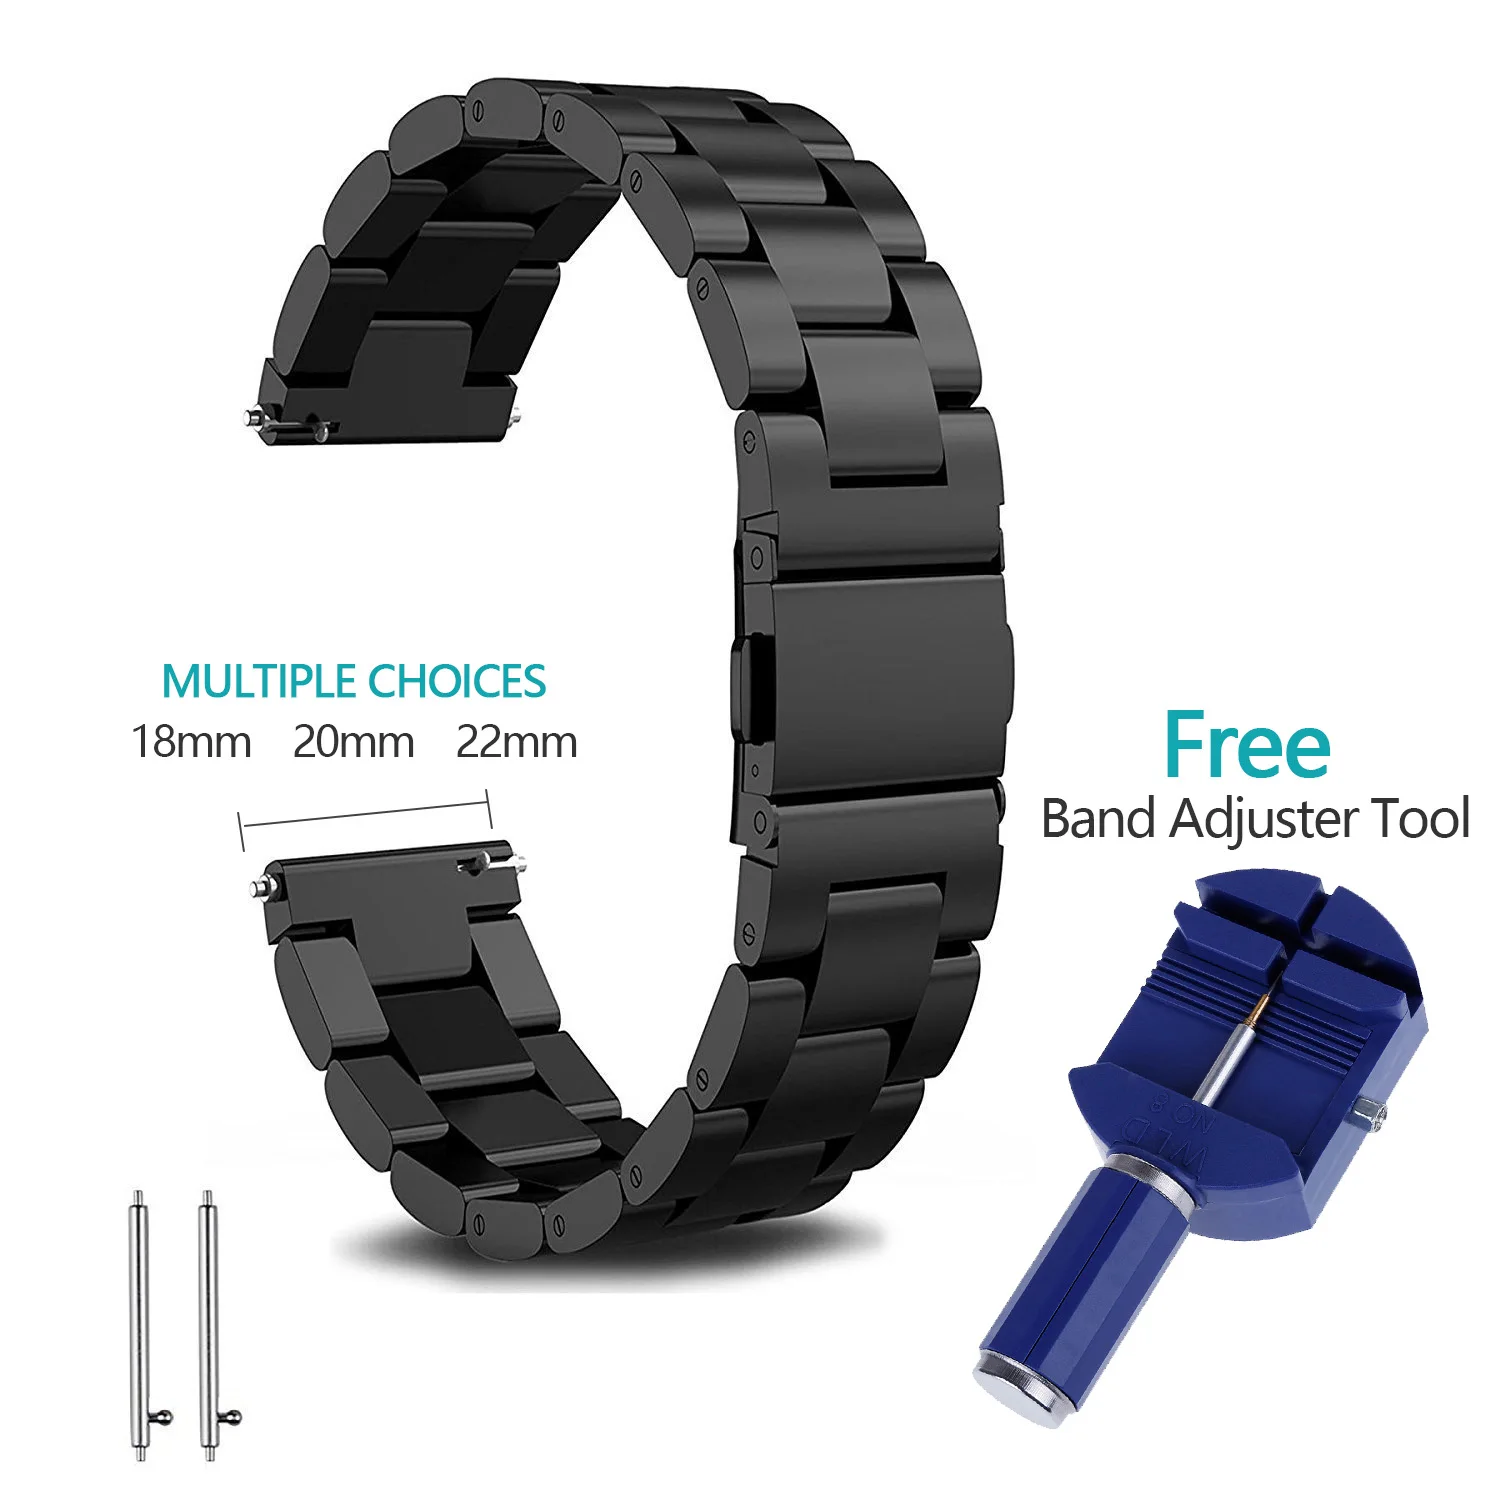 18mm 20mm 22mm Stainless Steel Watch Band Strap For Samsung Gear S2 S3 smart watch Link bracelet black for Samsung Gear S2